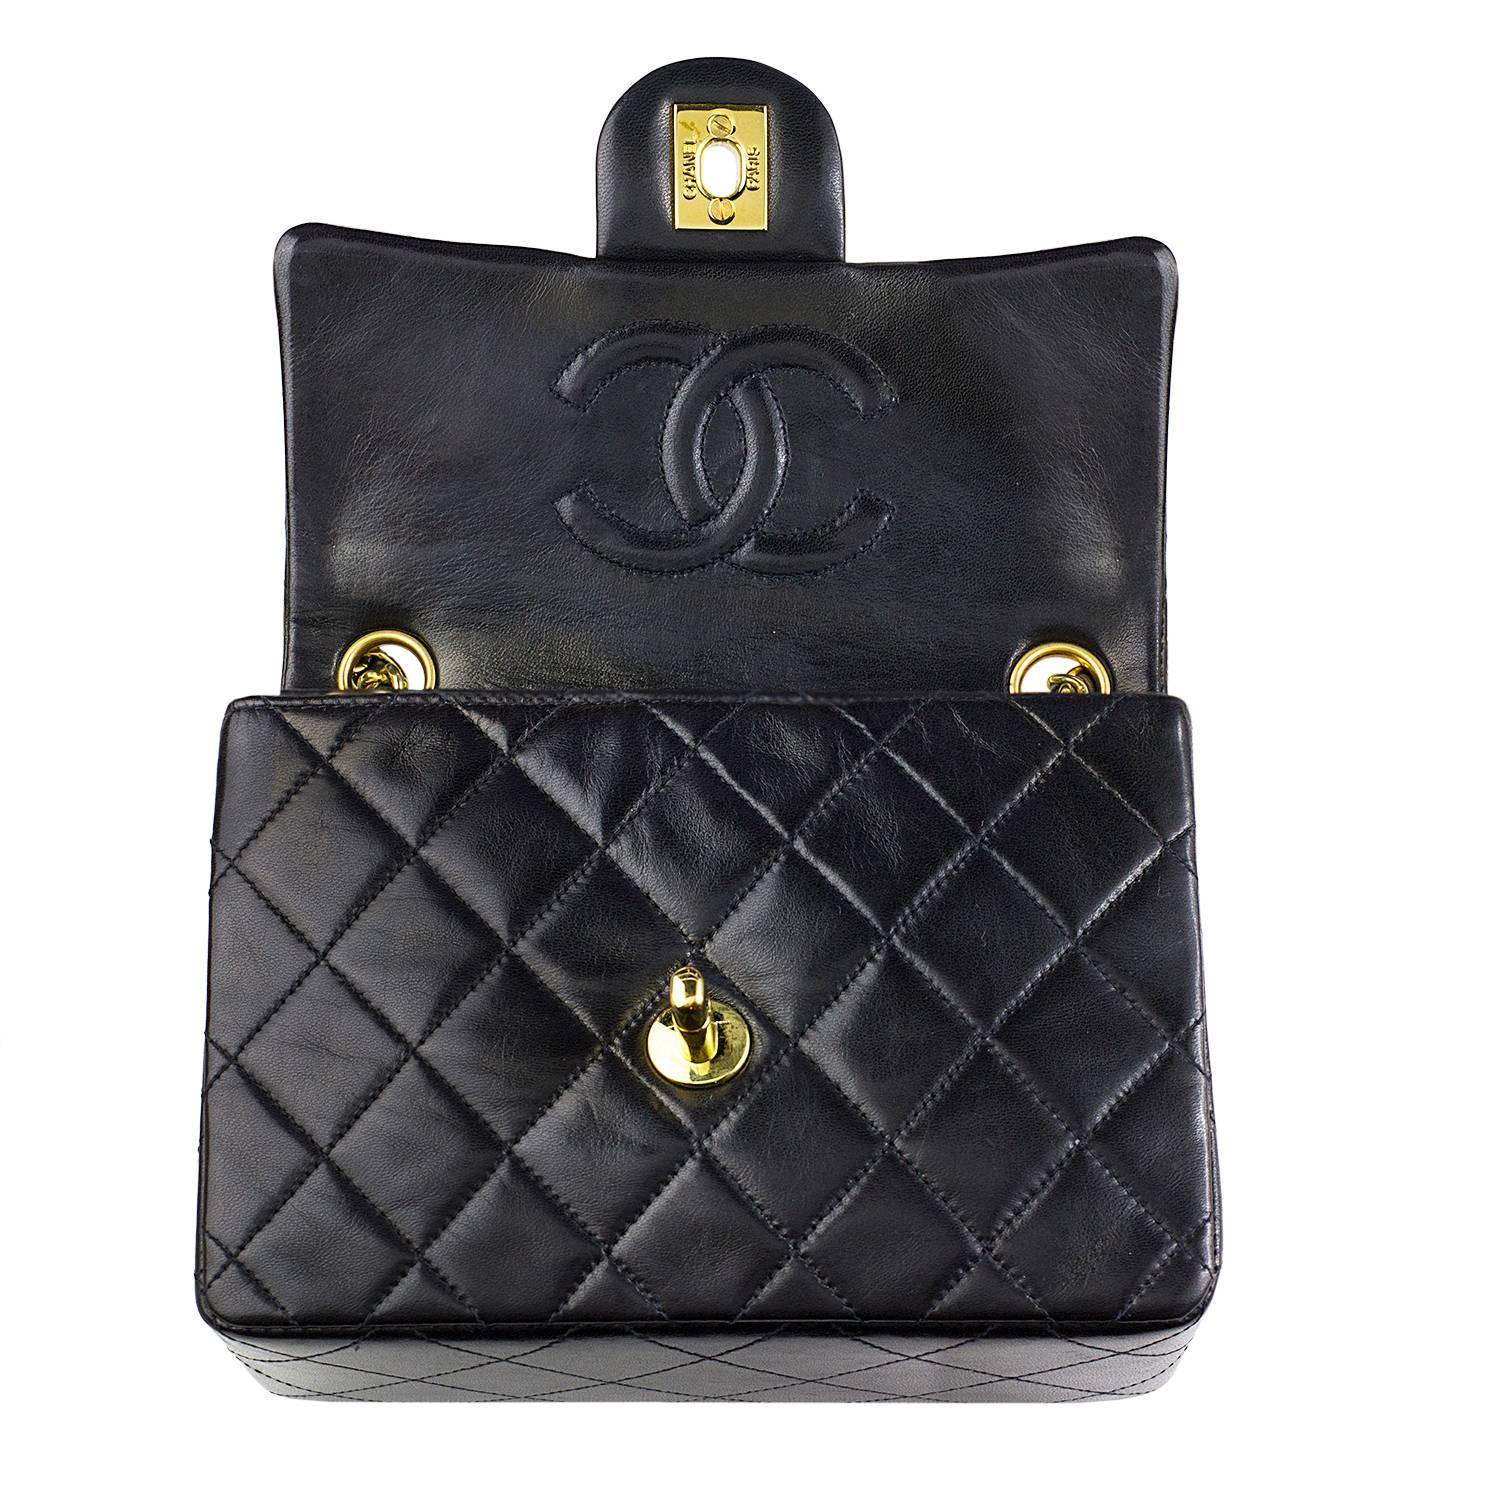 1991 Chanel Mini Flap Bag In Excellent Condition In London, GB